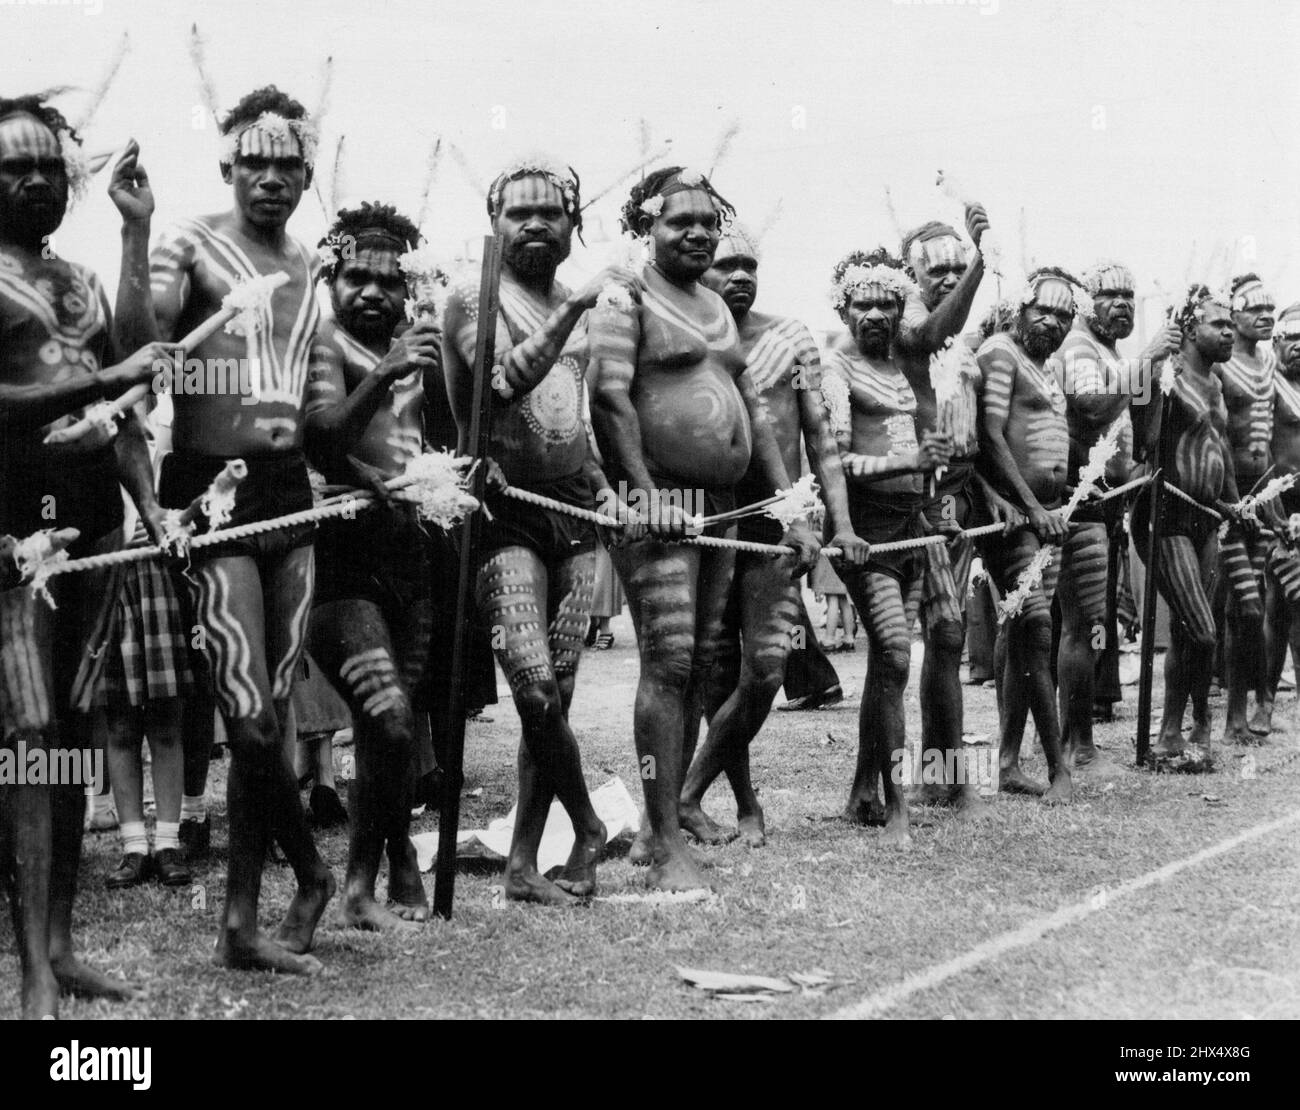 Native skin colouring - maggie brown to Kurir black designer our bodies - mainly yellow ochre - some red coin cloths - deep red, nearly black. White rope held up by black metre pickets are holding bones decorated with with tosses. At Whyalla aborigines from a mission station "dressed" for the Queen's visit. April 12, 1954. Stock Photo